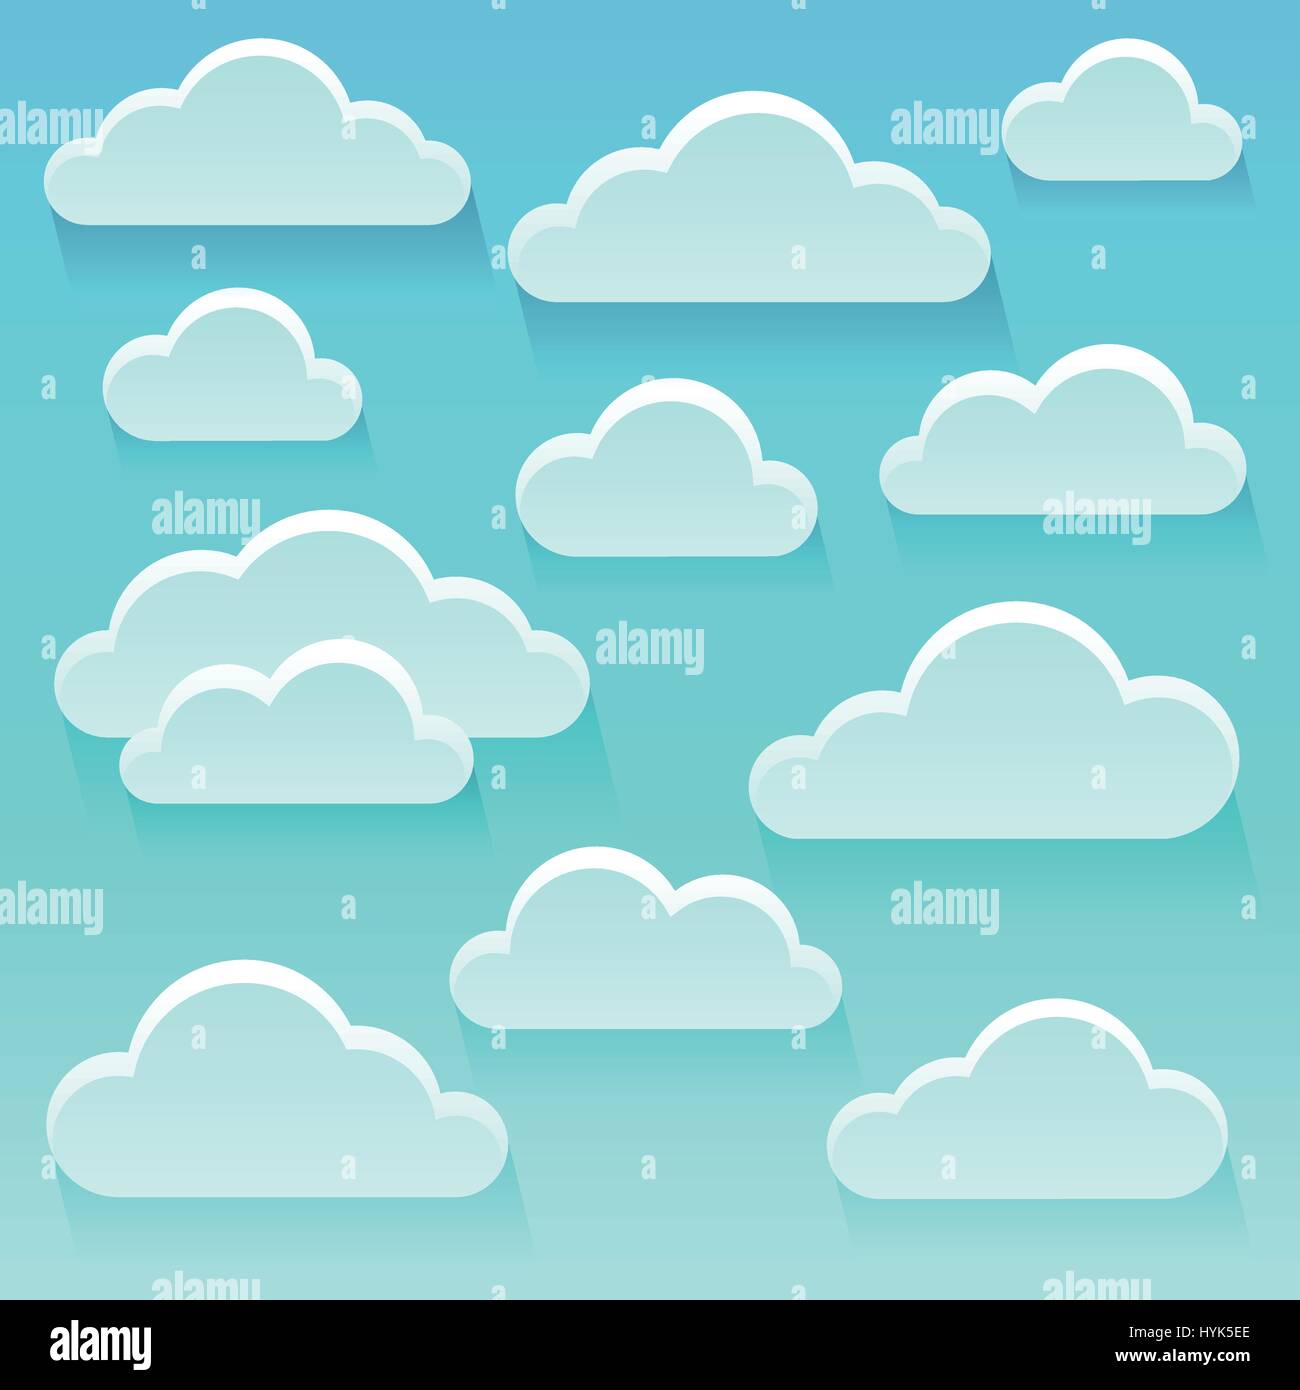 Stylized clouds theme image 6 - eps10 vector illustration. Stock Vector